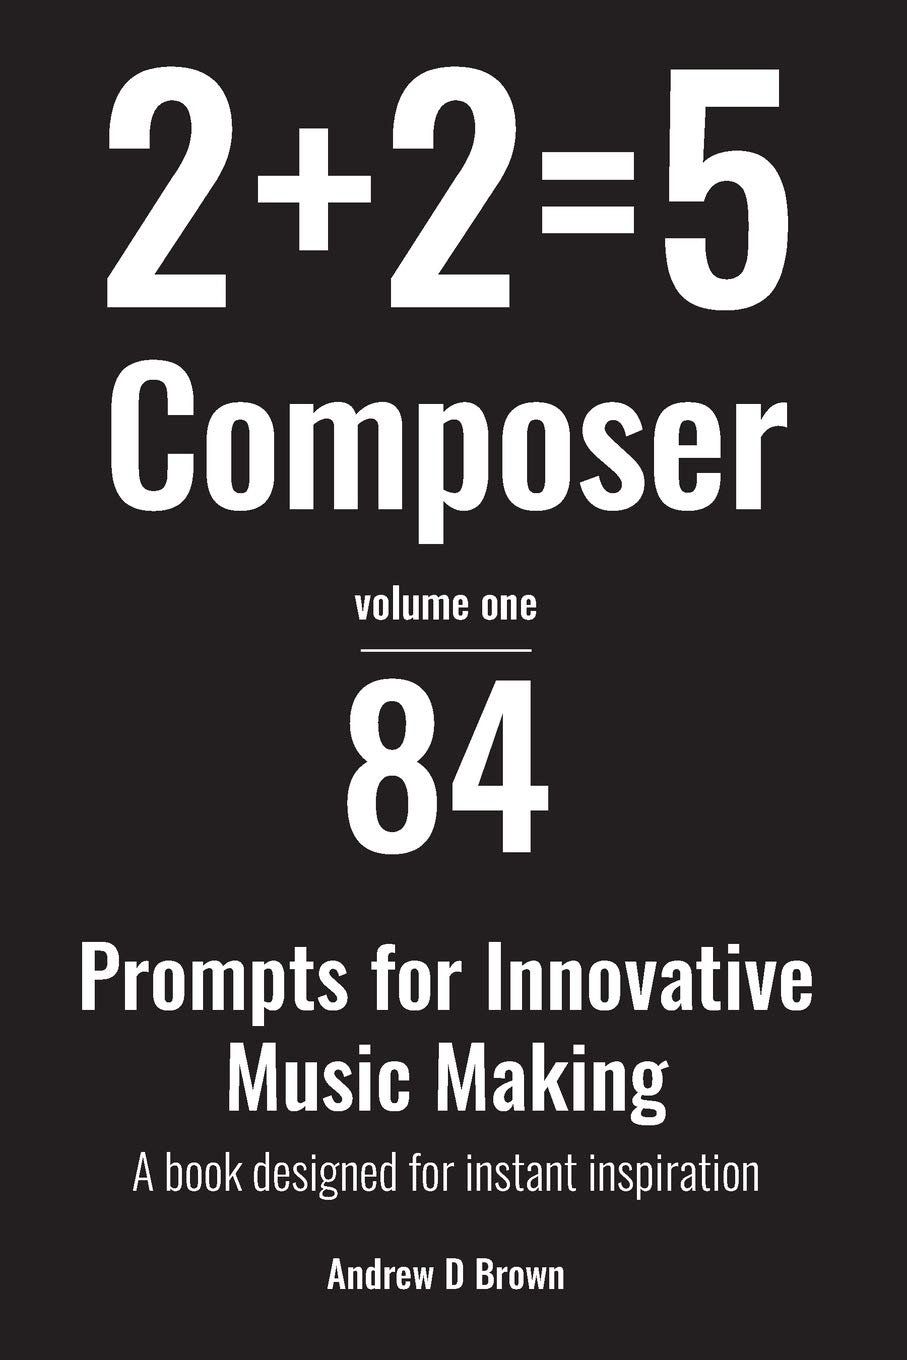 2+2=5 Composer: 84 strategies and prompts for innovative music making